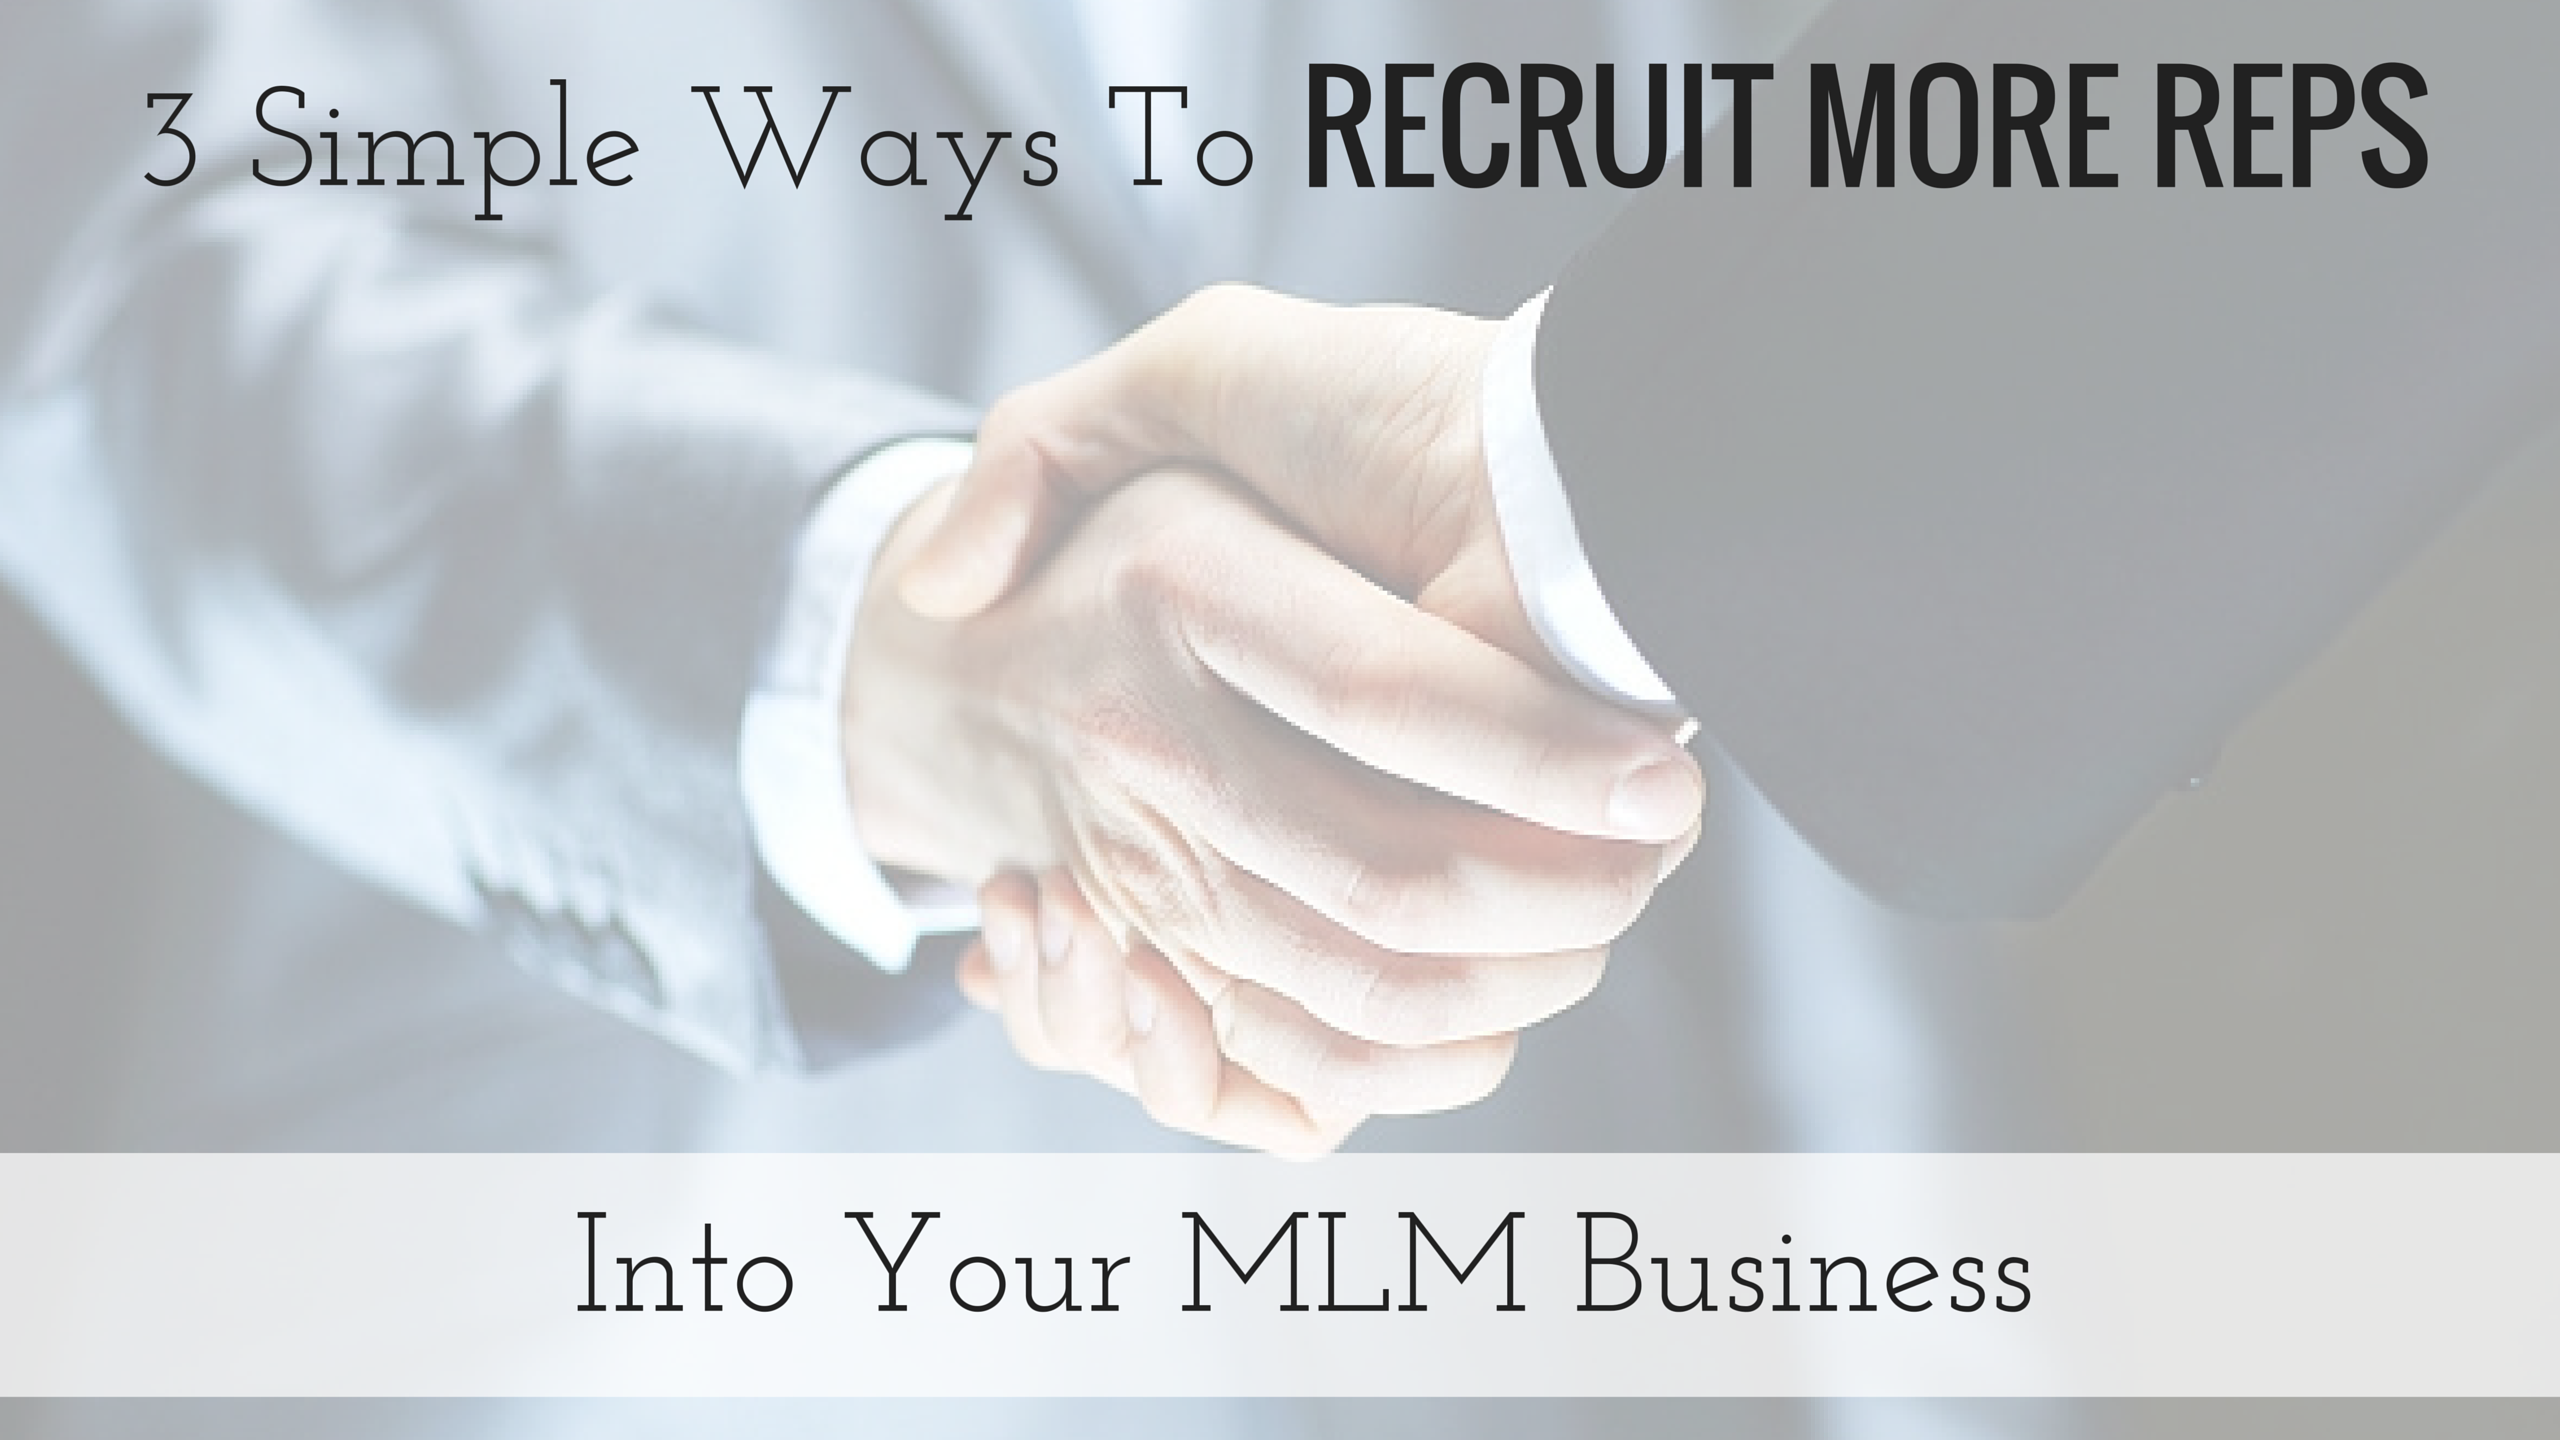 mlm business